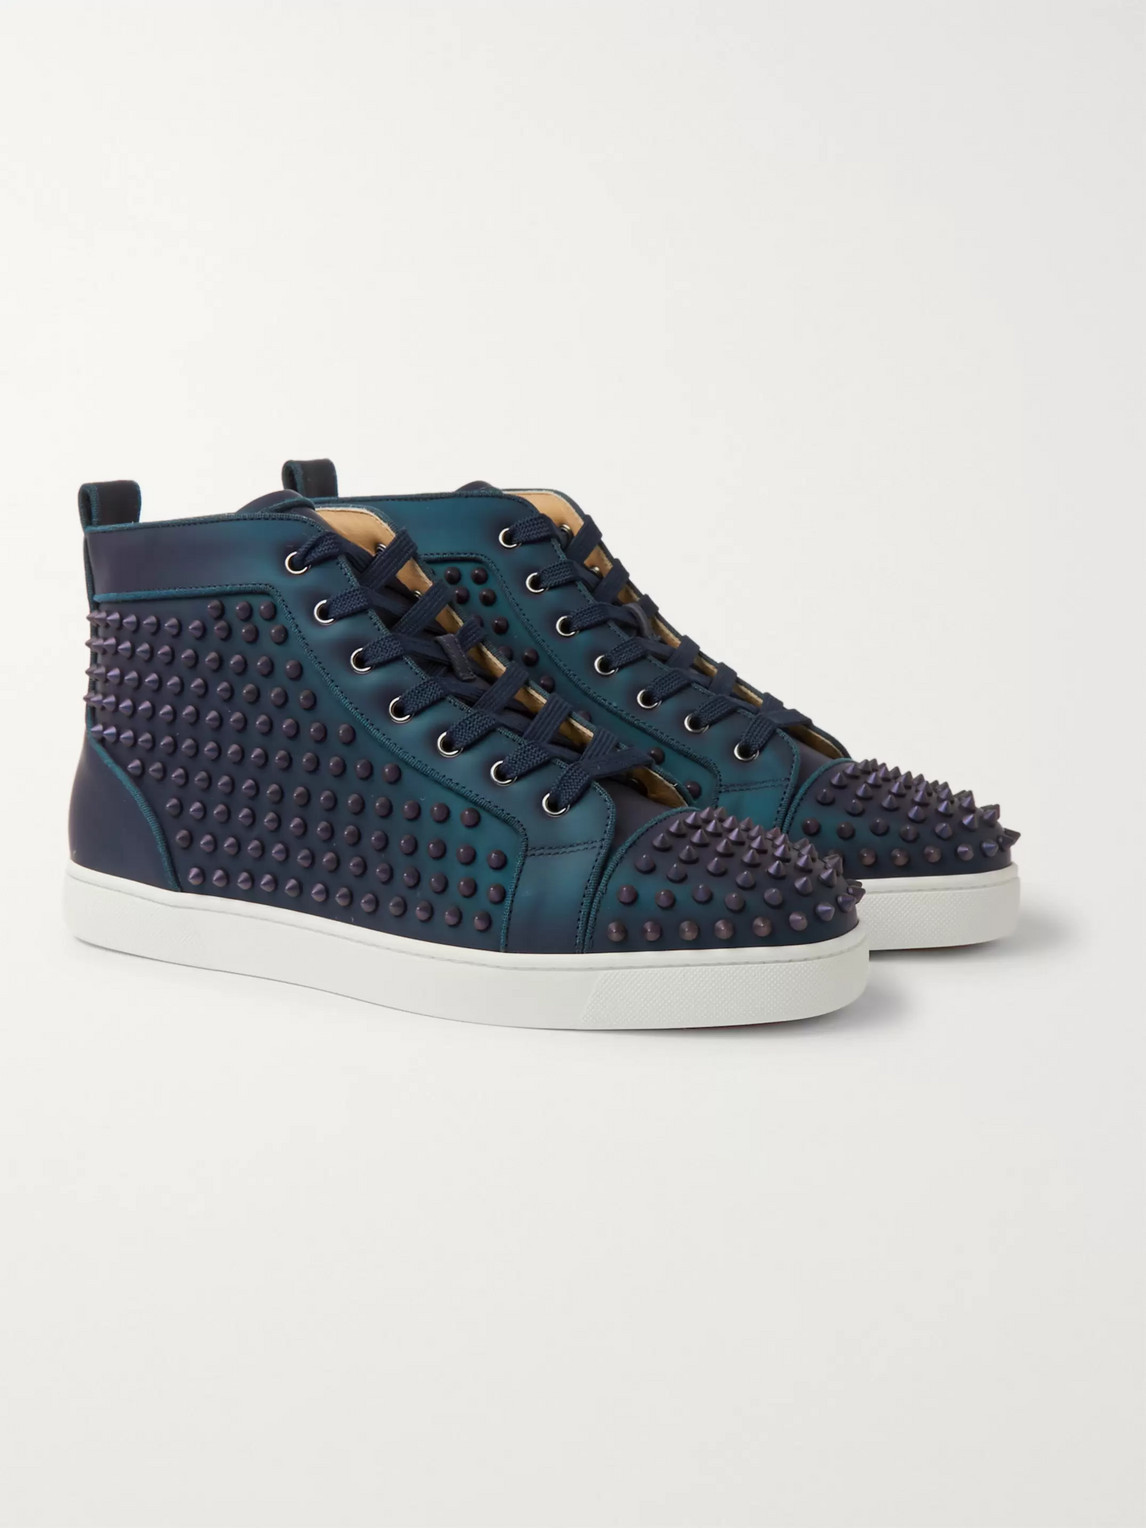 CHRISTIAN LOUBOUTIN LOUIS ORLATO SPIKES IRIDESCENT LEATHER HIGH-TOP trainers